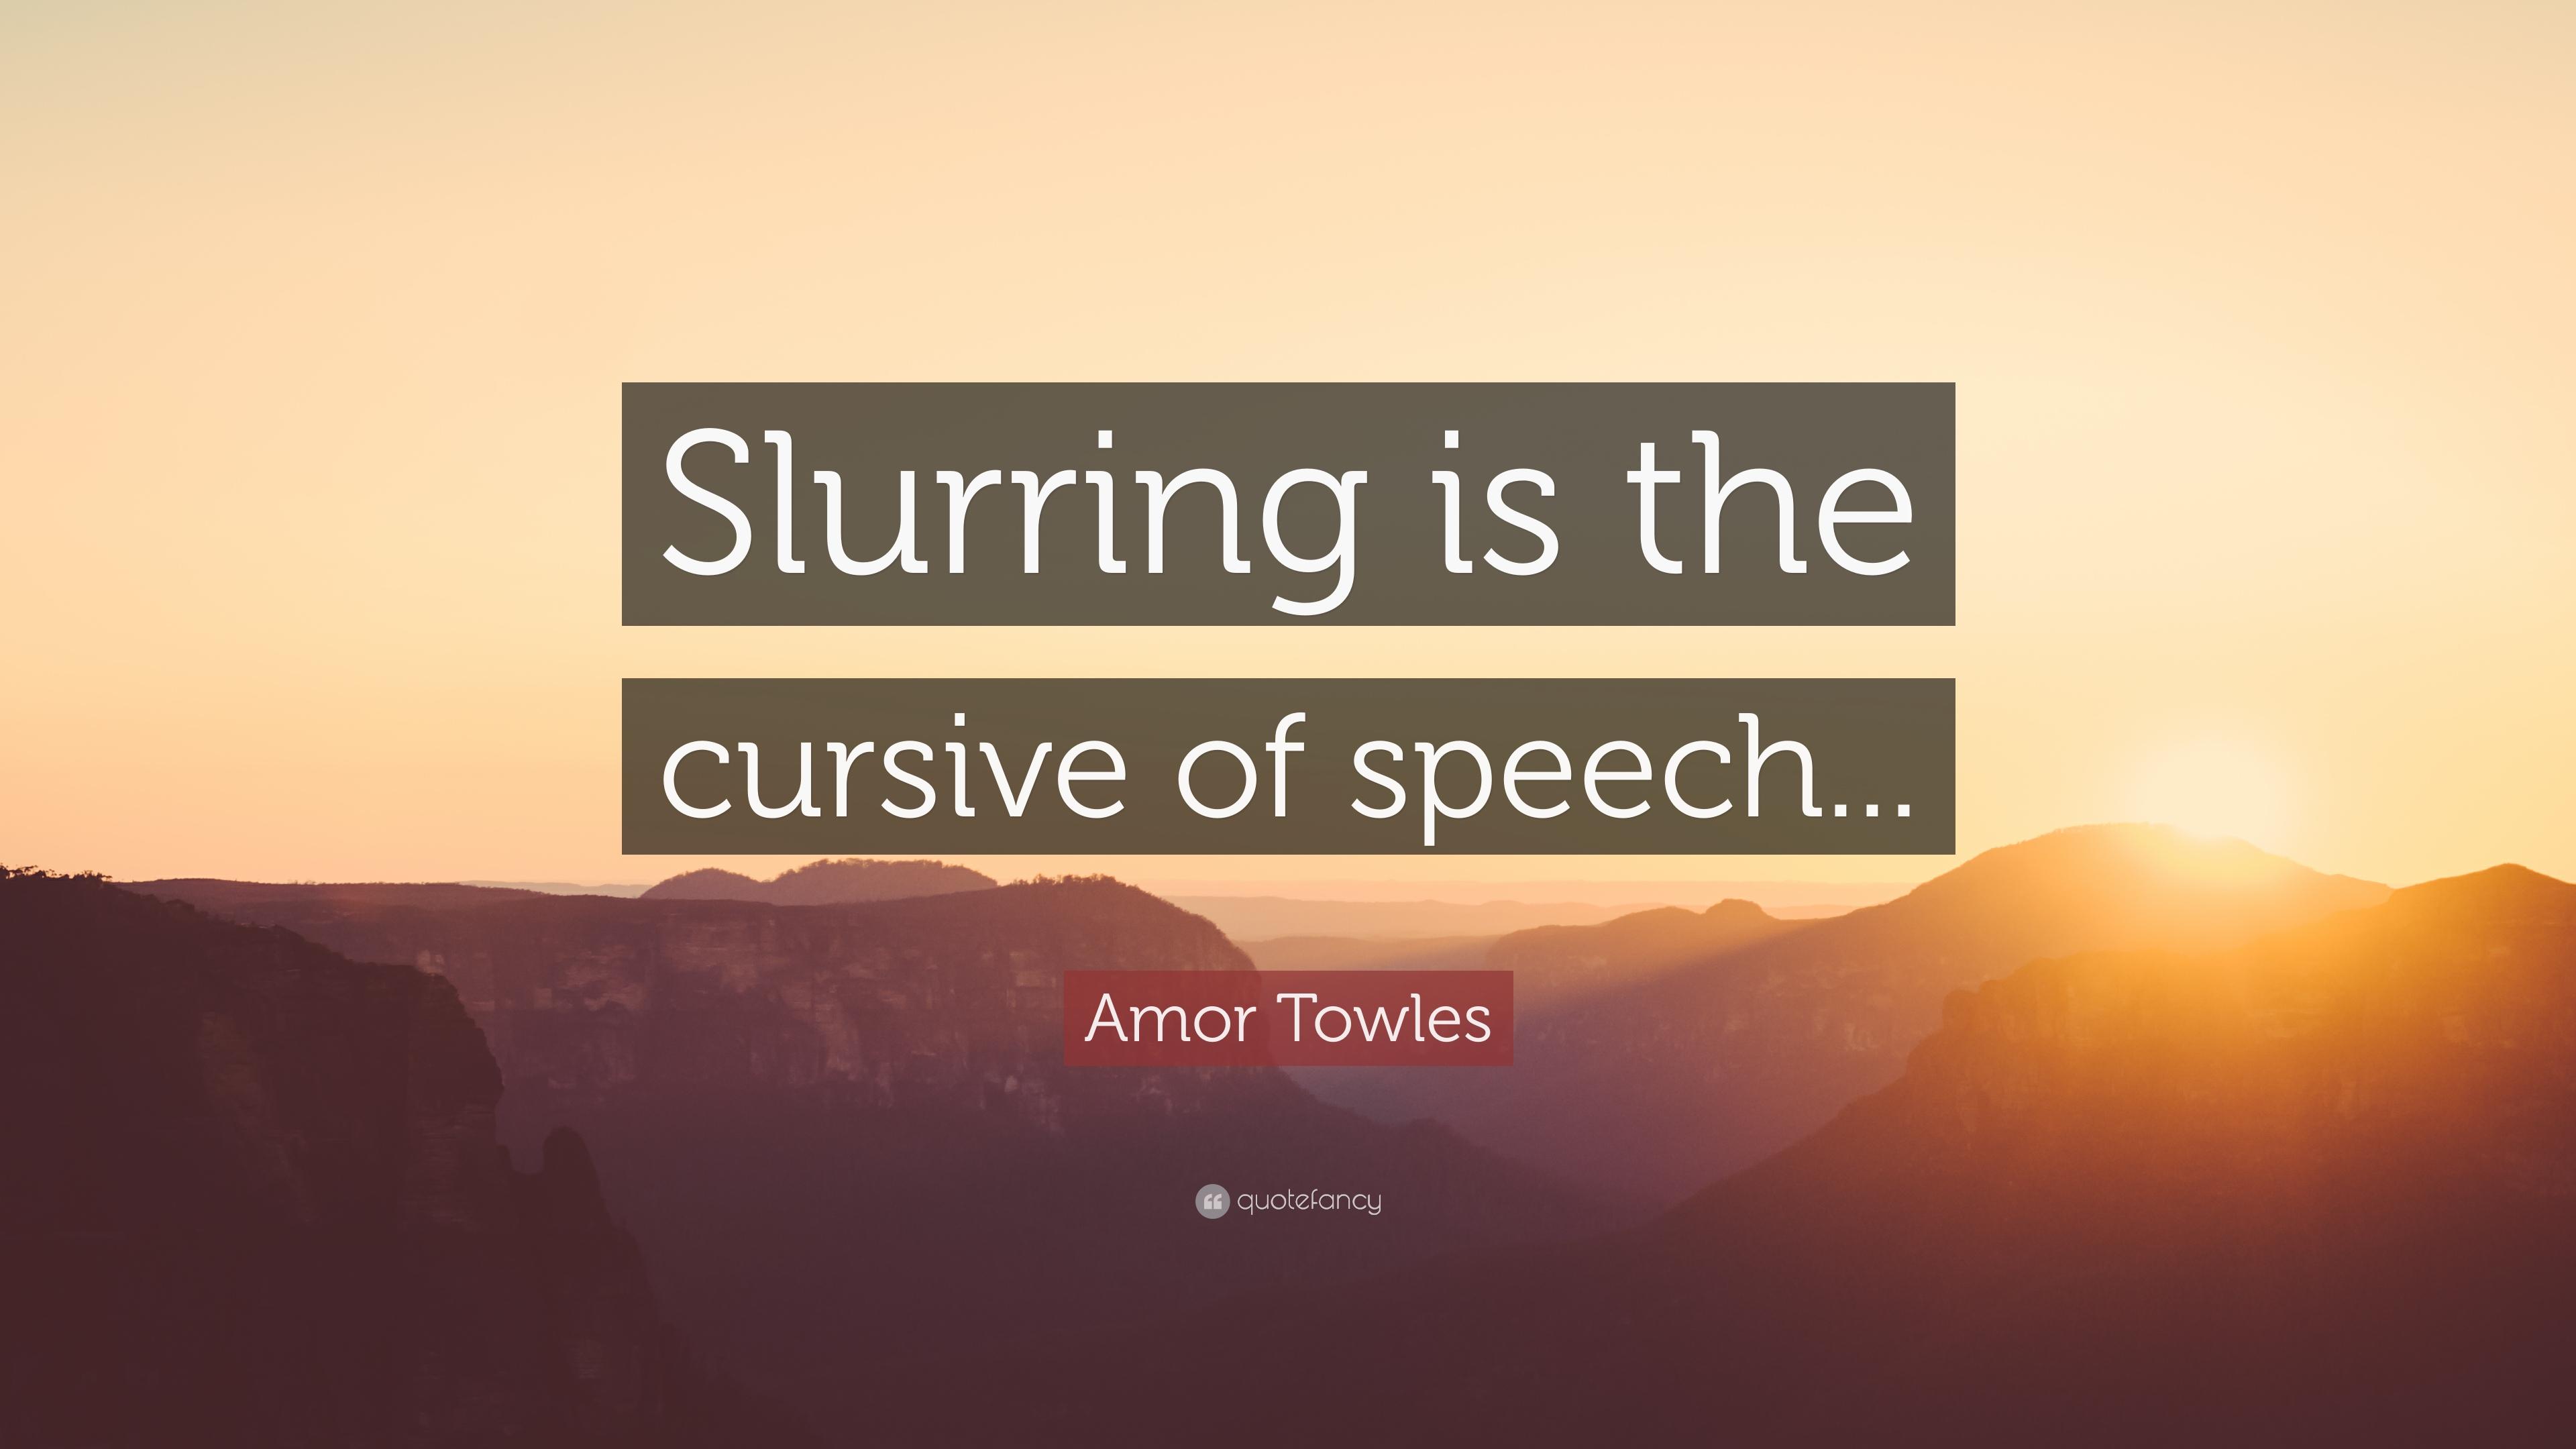 Amor Towles Quote: “Slurring is the cursive of speech.” 7